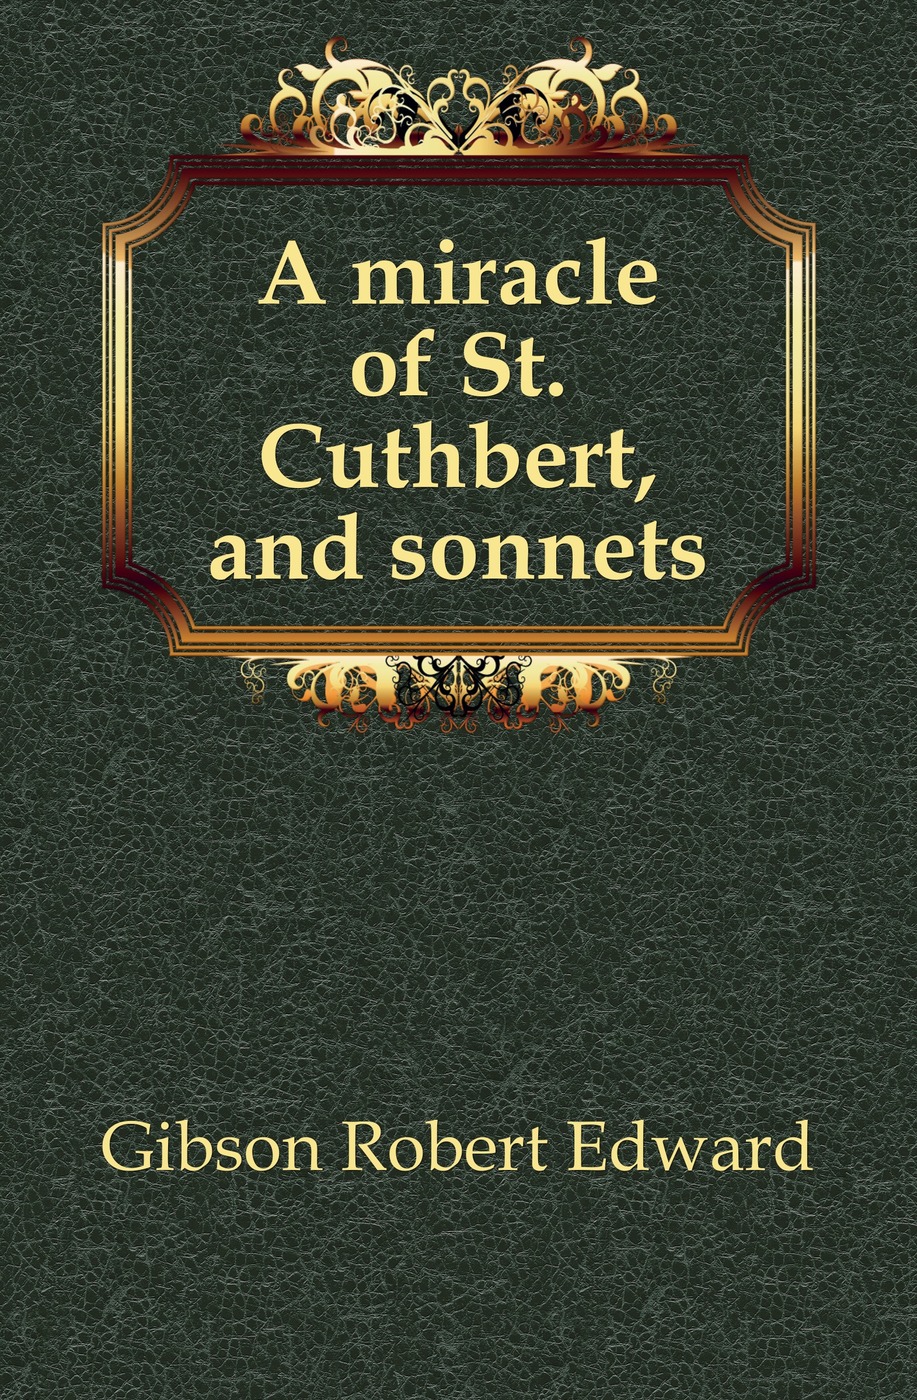 A miracle of St. Cuthbert, and sonnets